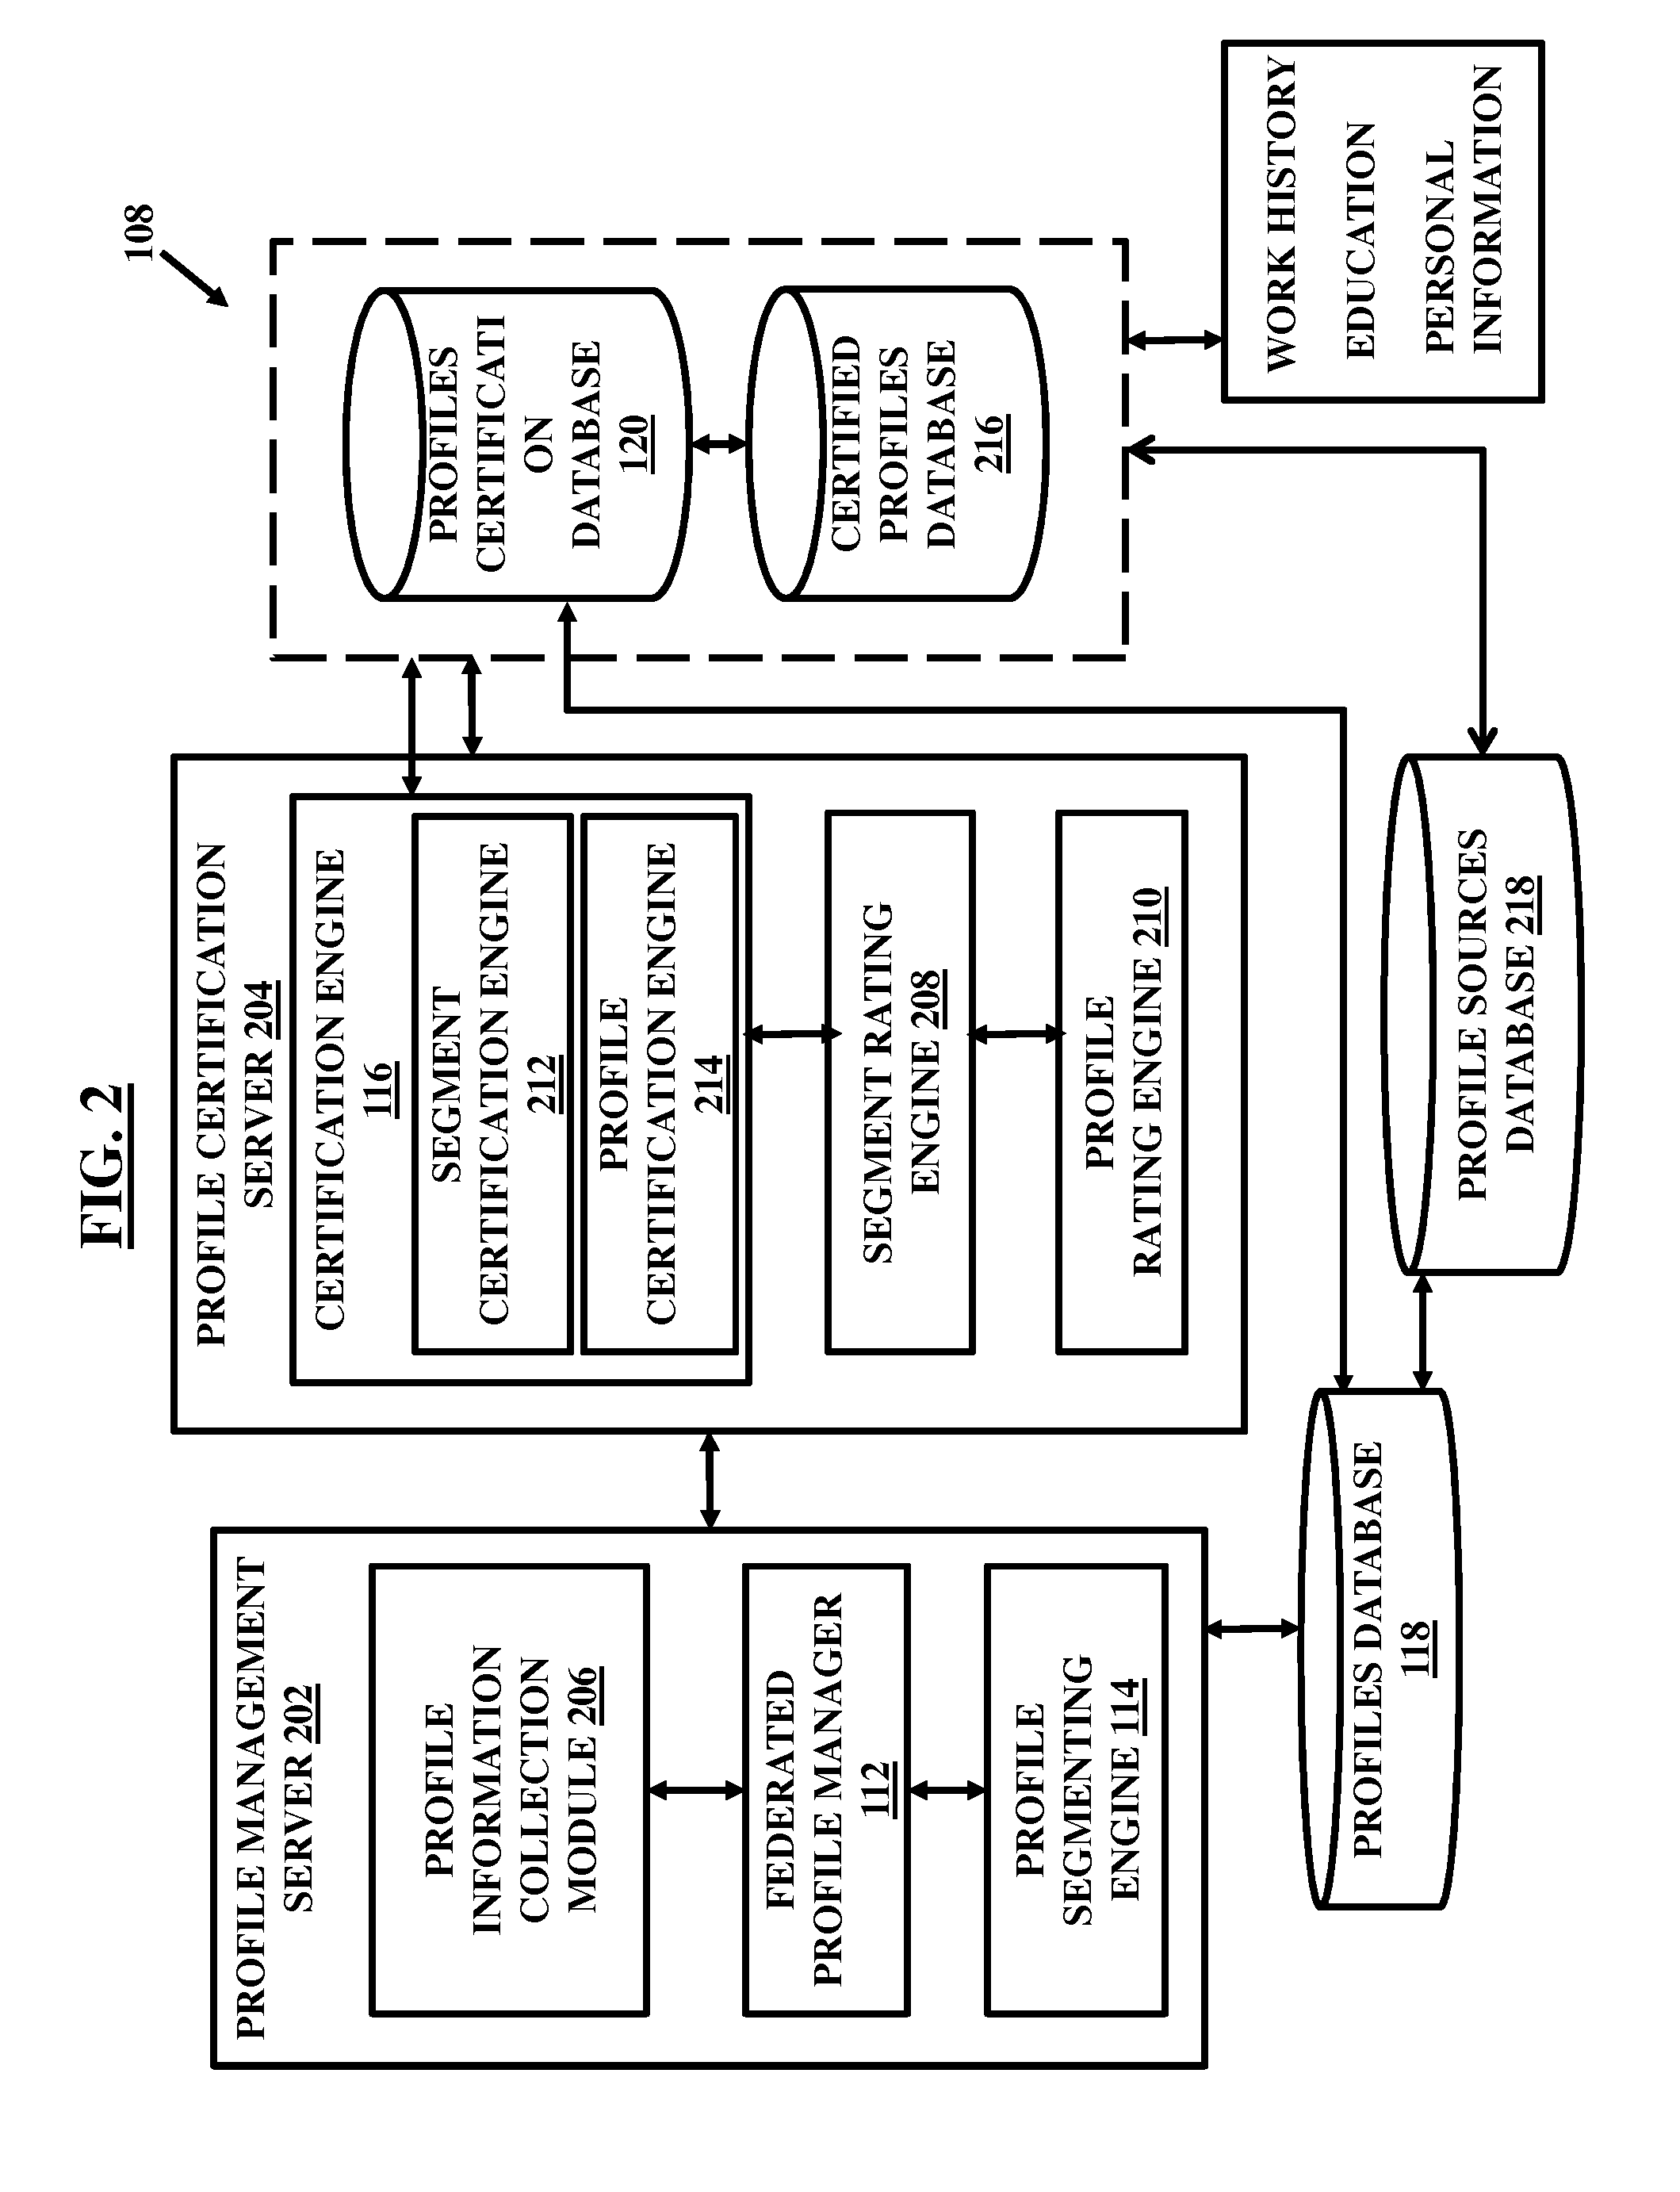 System and method for facilitating crowdsourced credentialing and accreditation